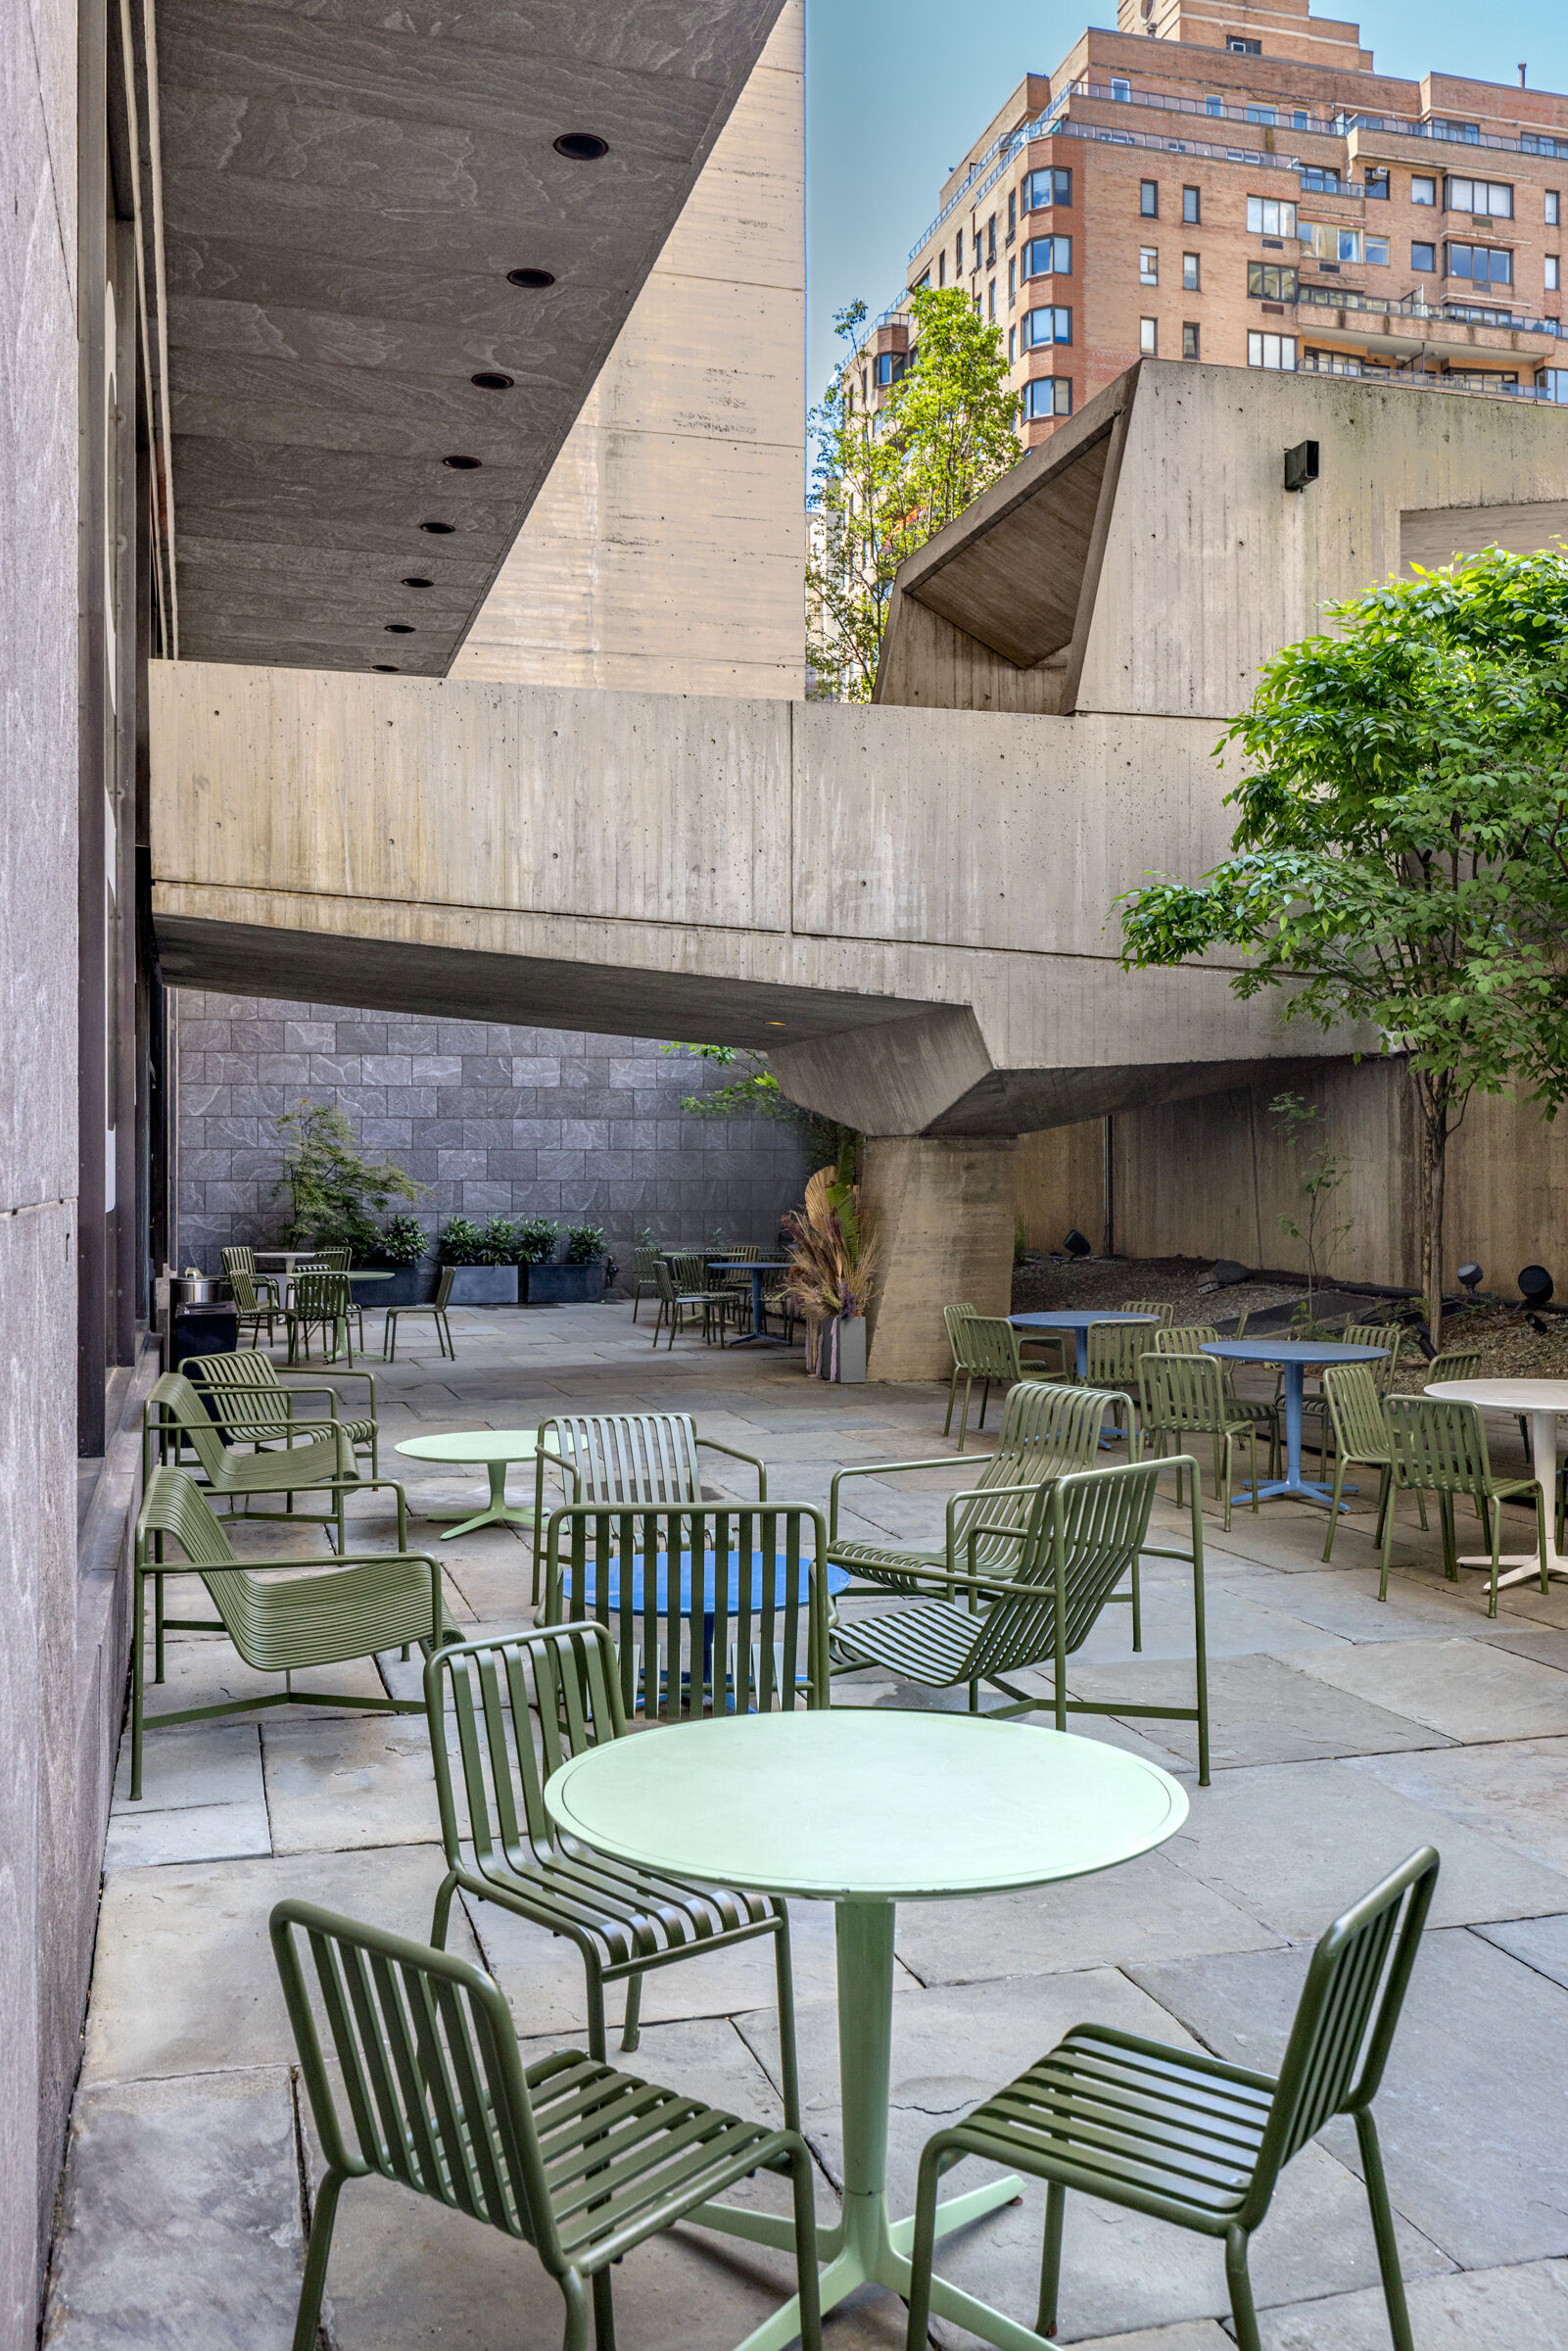 The outdoor terrace cafe at the Breuer Building with tables and leafy trees.